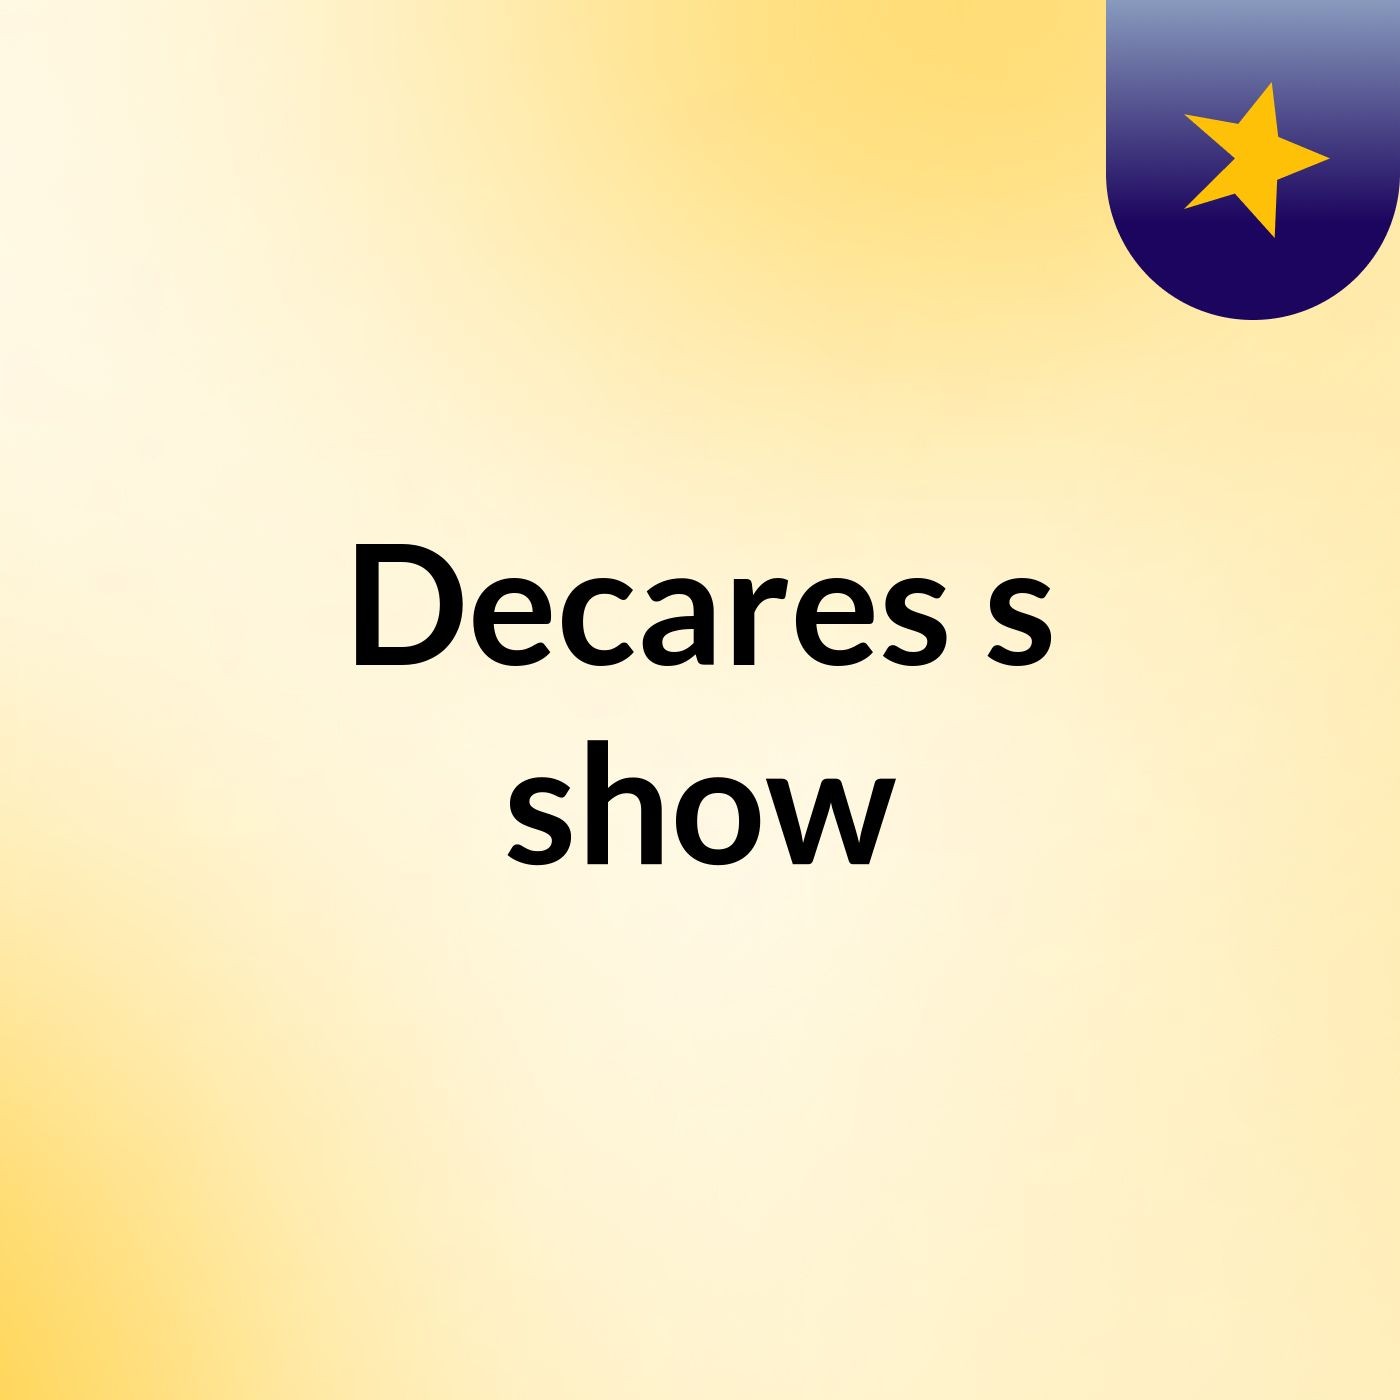 Decares's show